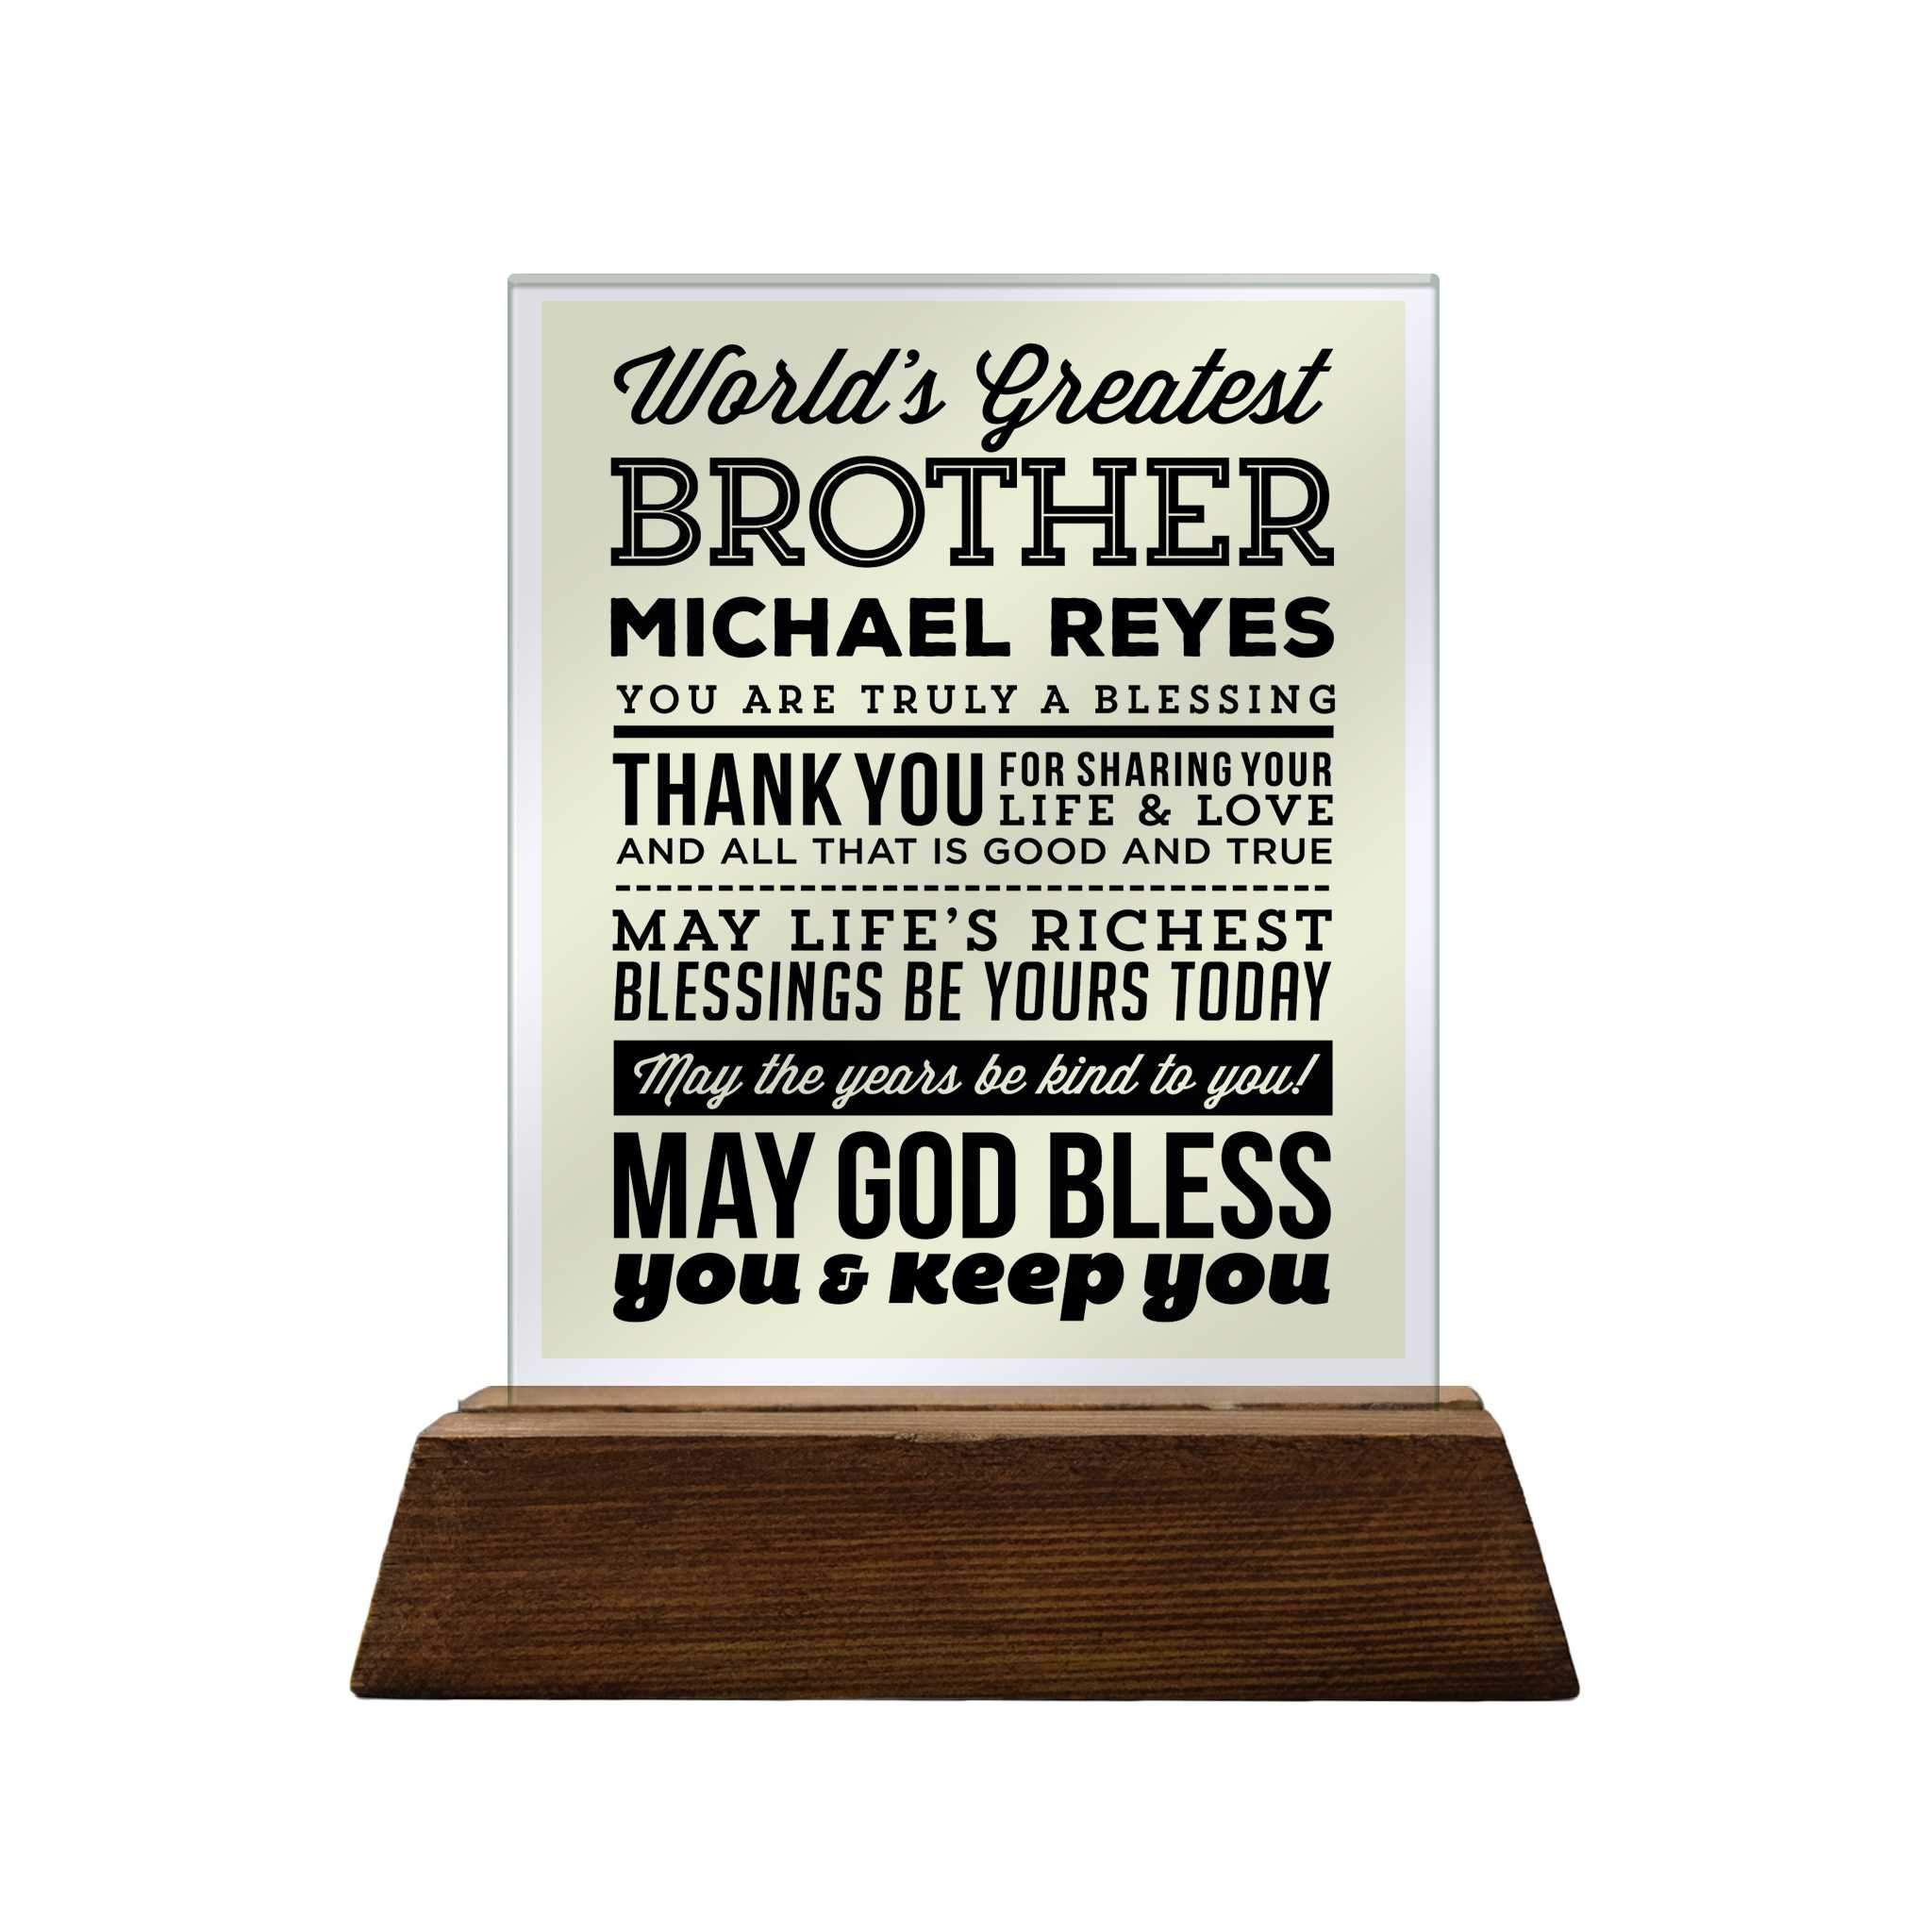 World's Greatest Brother Glass Plaque